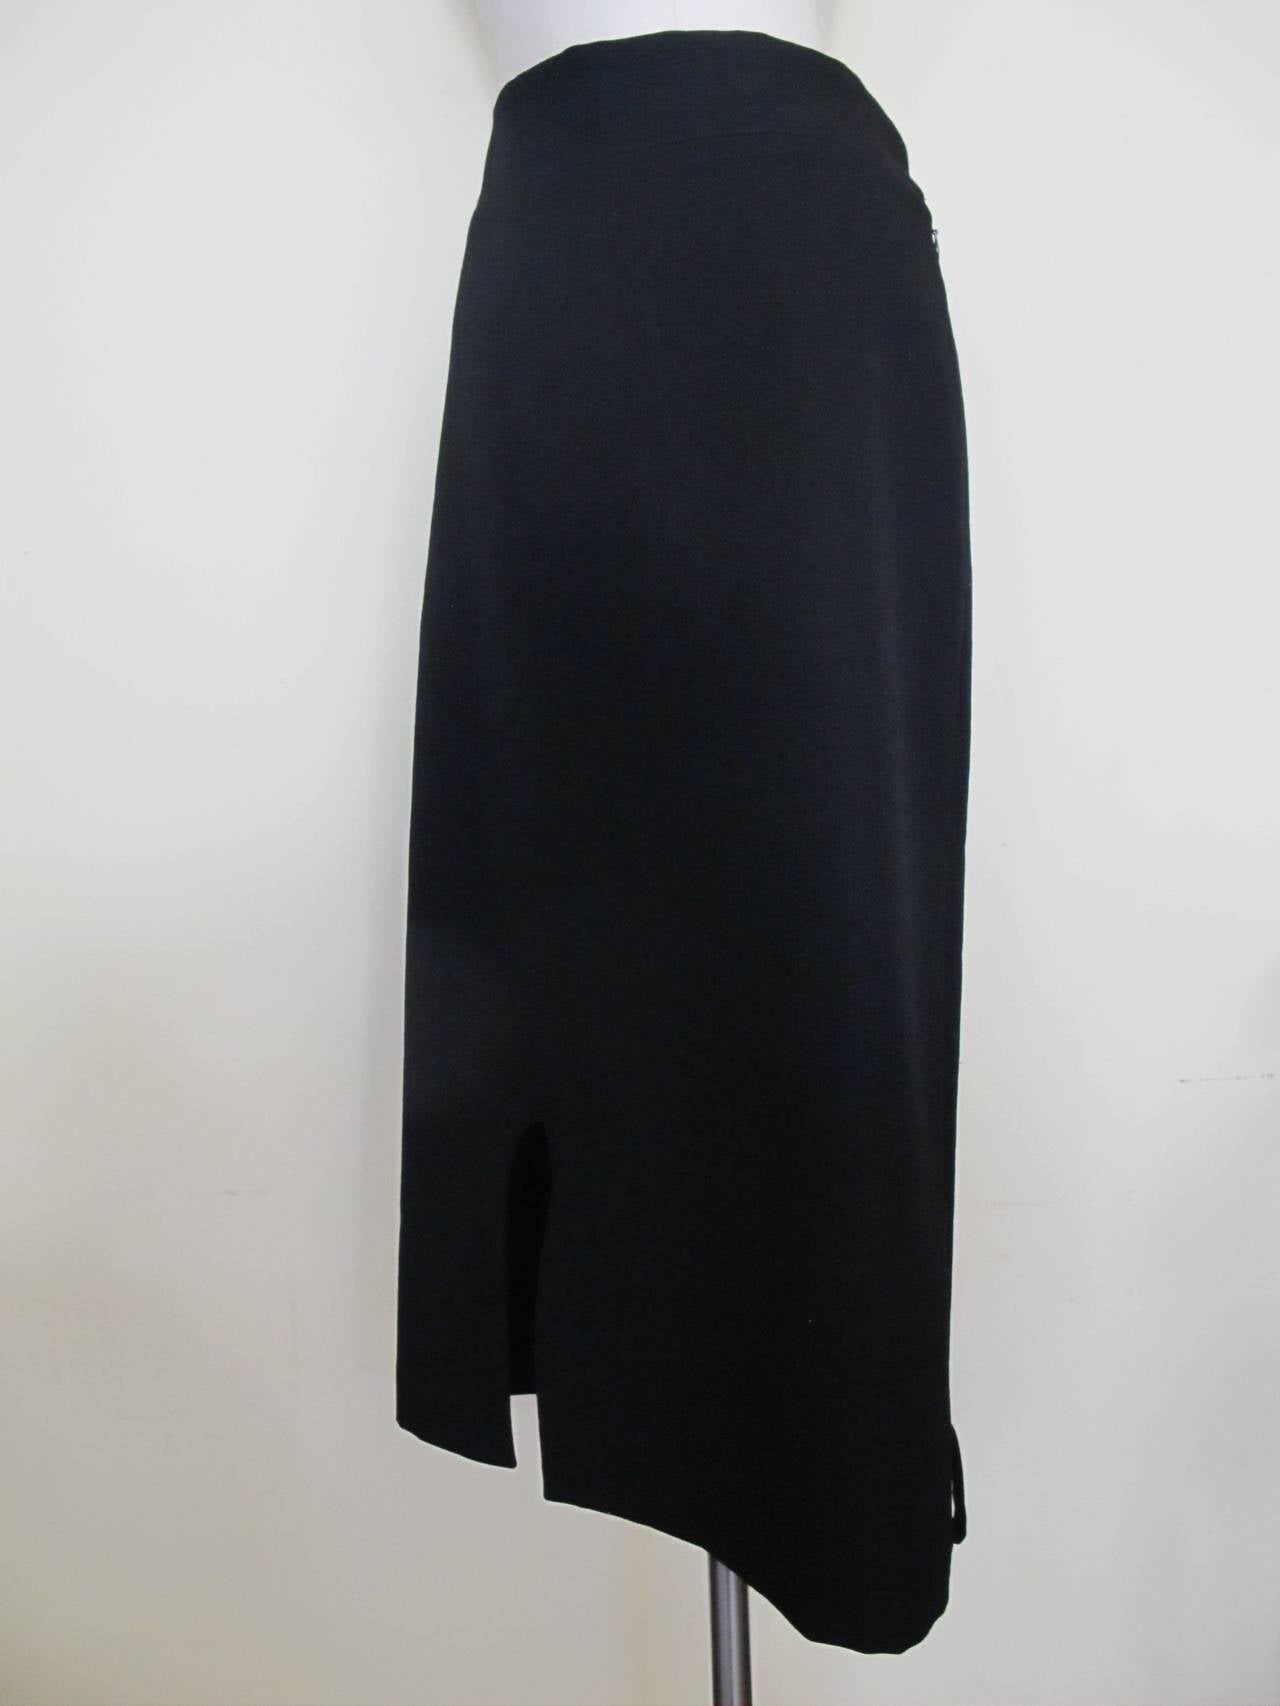 Yohji Yamamoto Black Wool Skirt is perfect for day or evening. The waist band measures 2.25 inches and there is a 9.5 inch slit on the bottom right side of the skirt. It is part of the collection of the the former Fashion Director of Saks Fifth